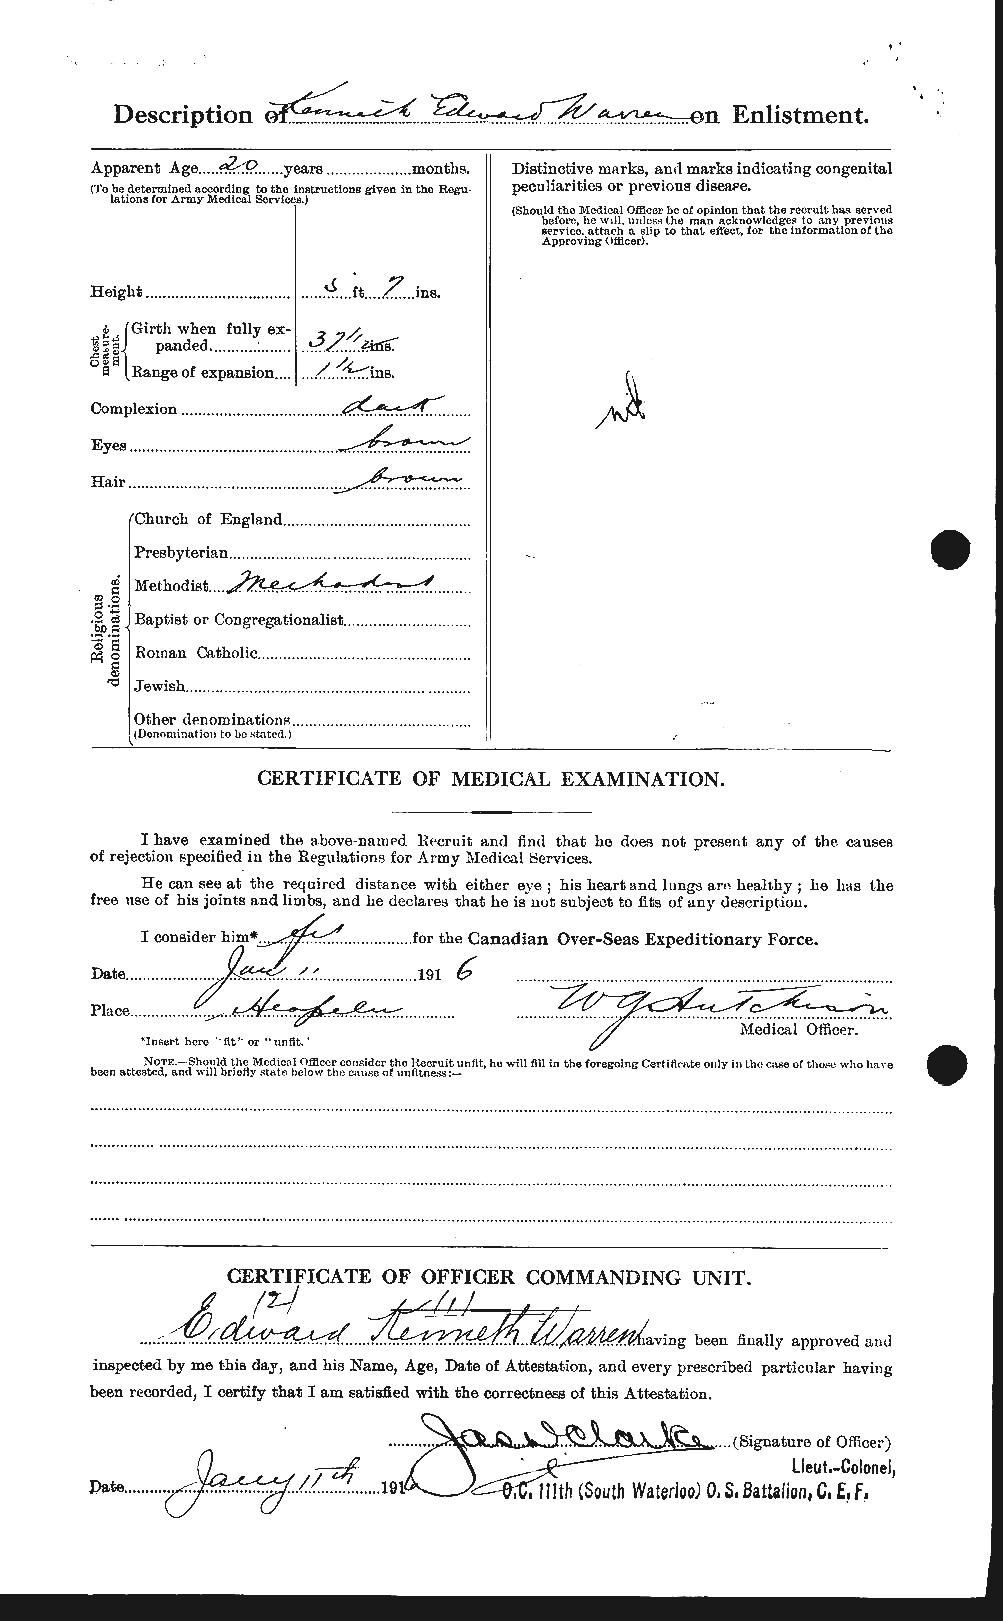 Personnel Records of the First World War - CEF 658575b